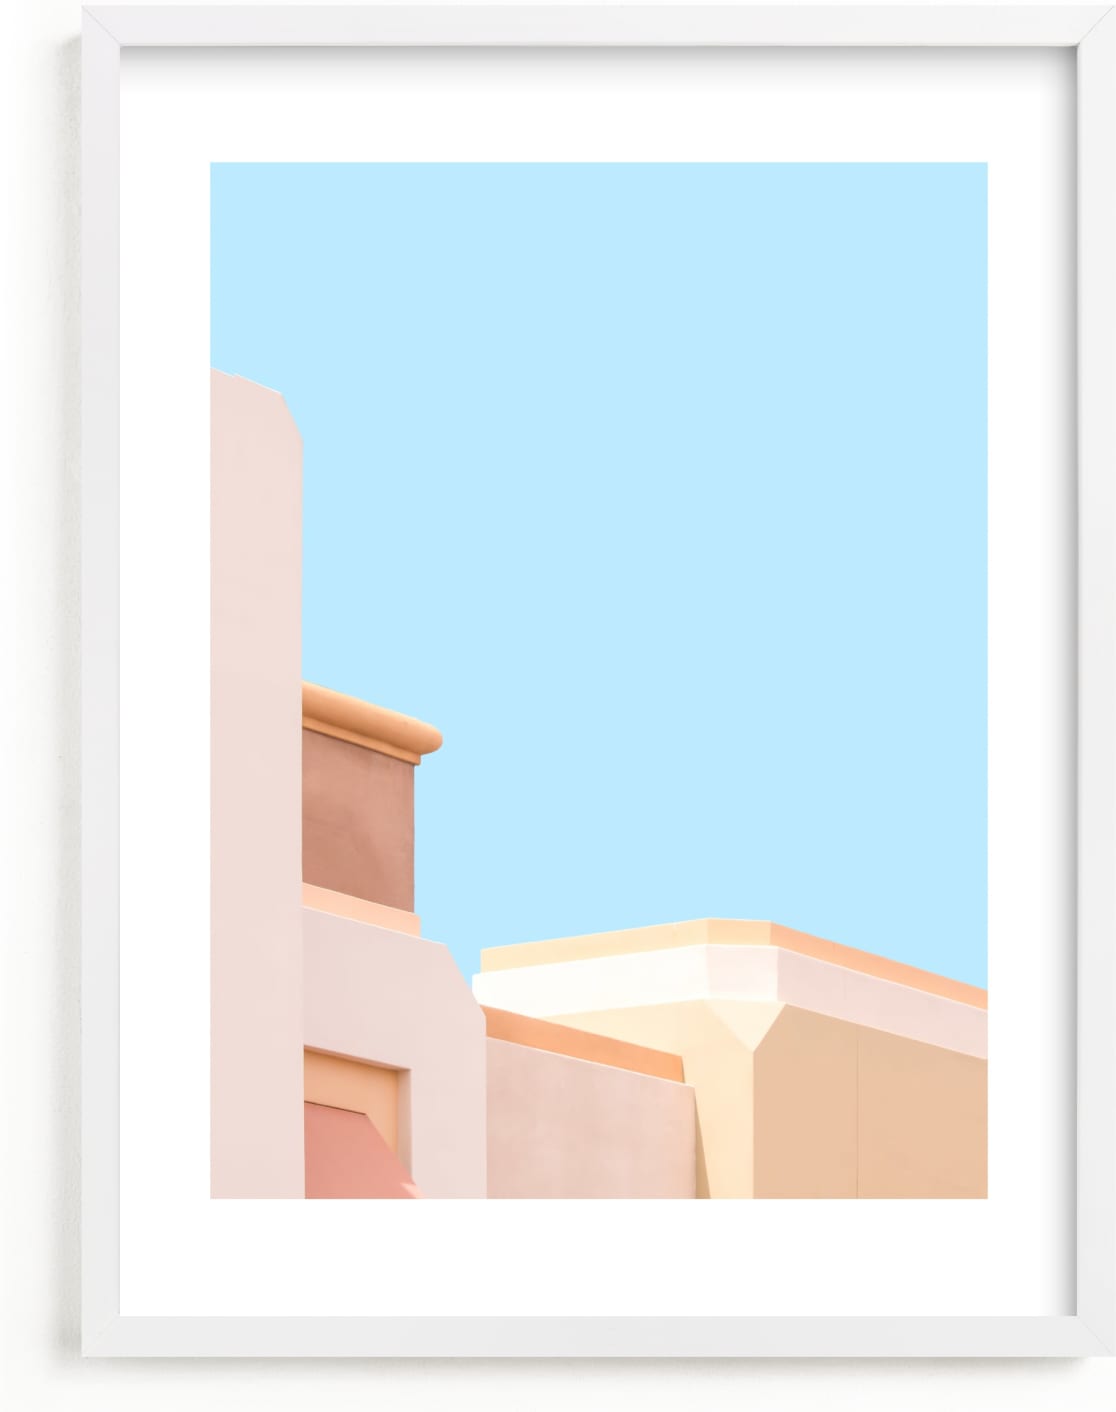 This is a colorful kids wall art by Lisa Sundin called Pastel Desert Archiecture.